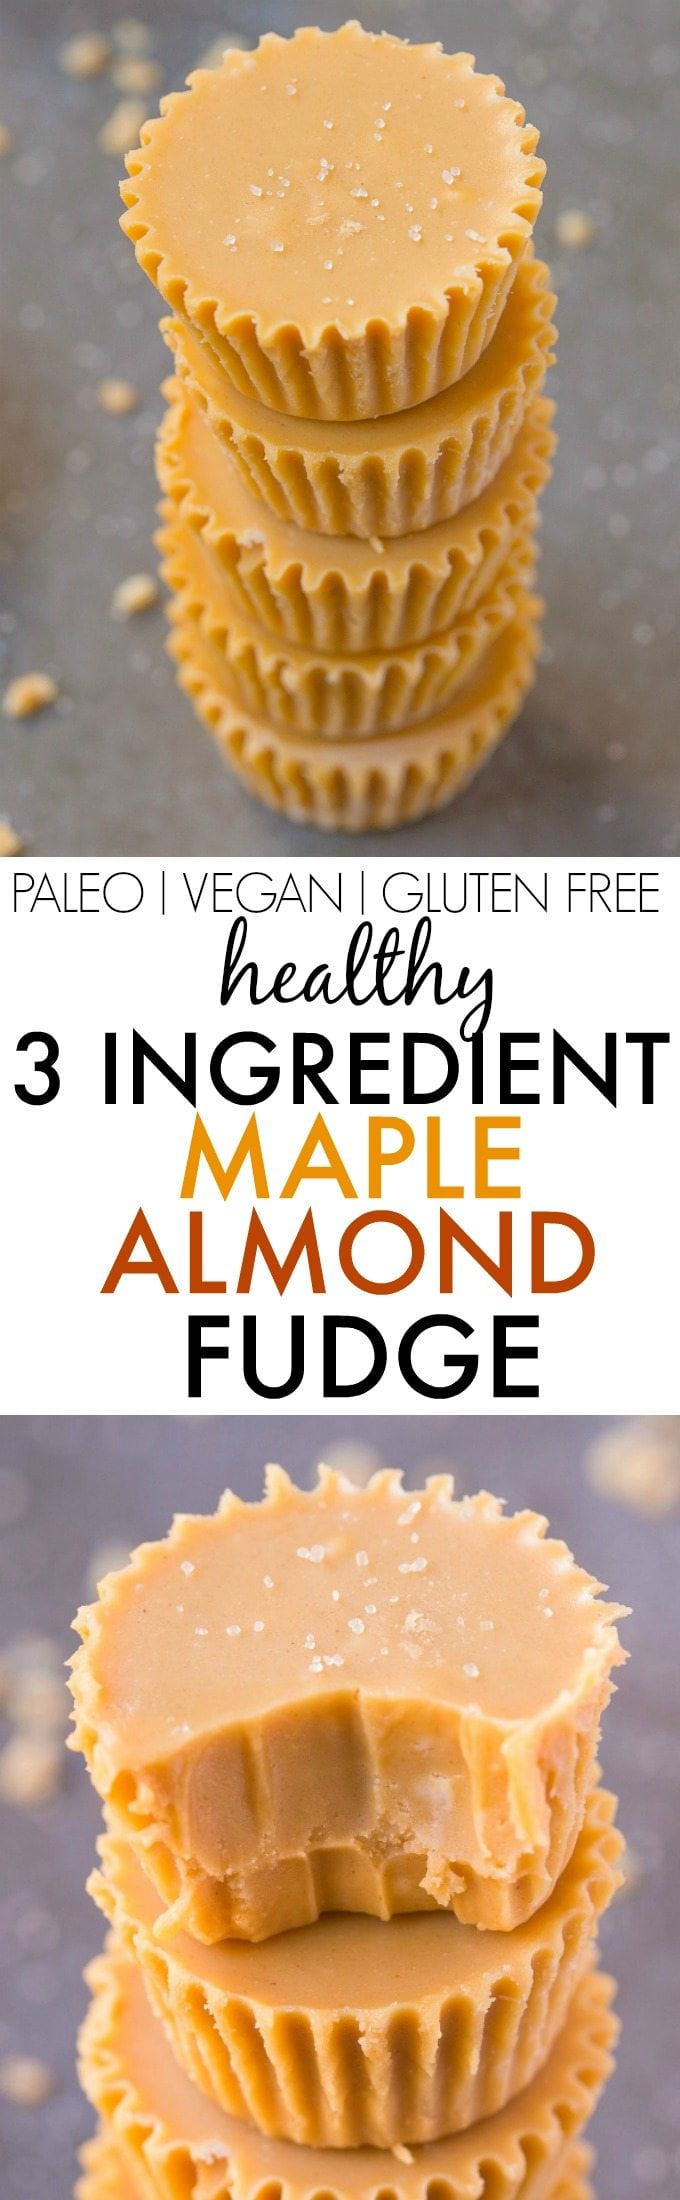 Healthy 3 Ingredient Maple Almond Fudge- Smooth, creamy and secretly healthy, this fudge takes seconds to make, and has NO butter, dairy, condensed milk or nasties! Seriously, THREE ingredient magic! {vegan, gluten free, paleo recipe}- thebigmansworld.com